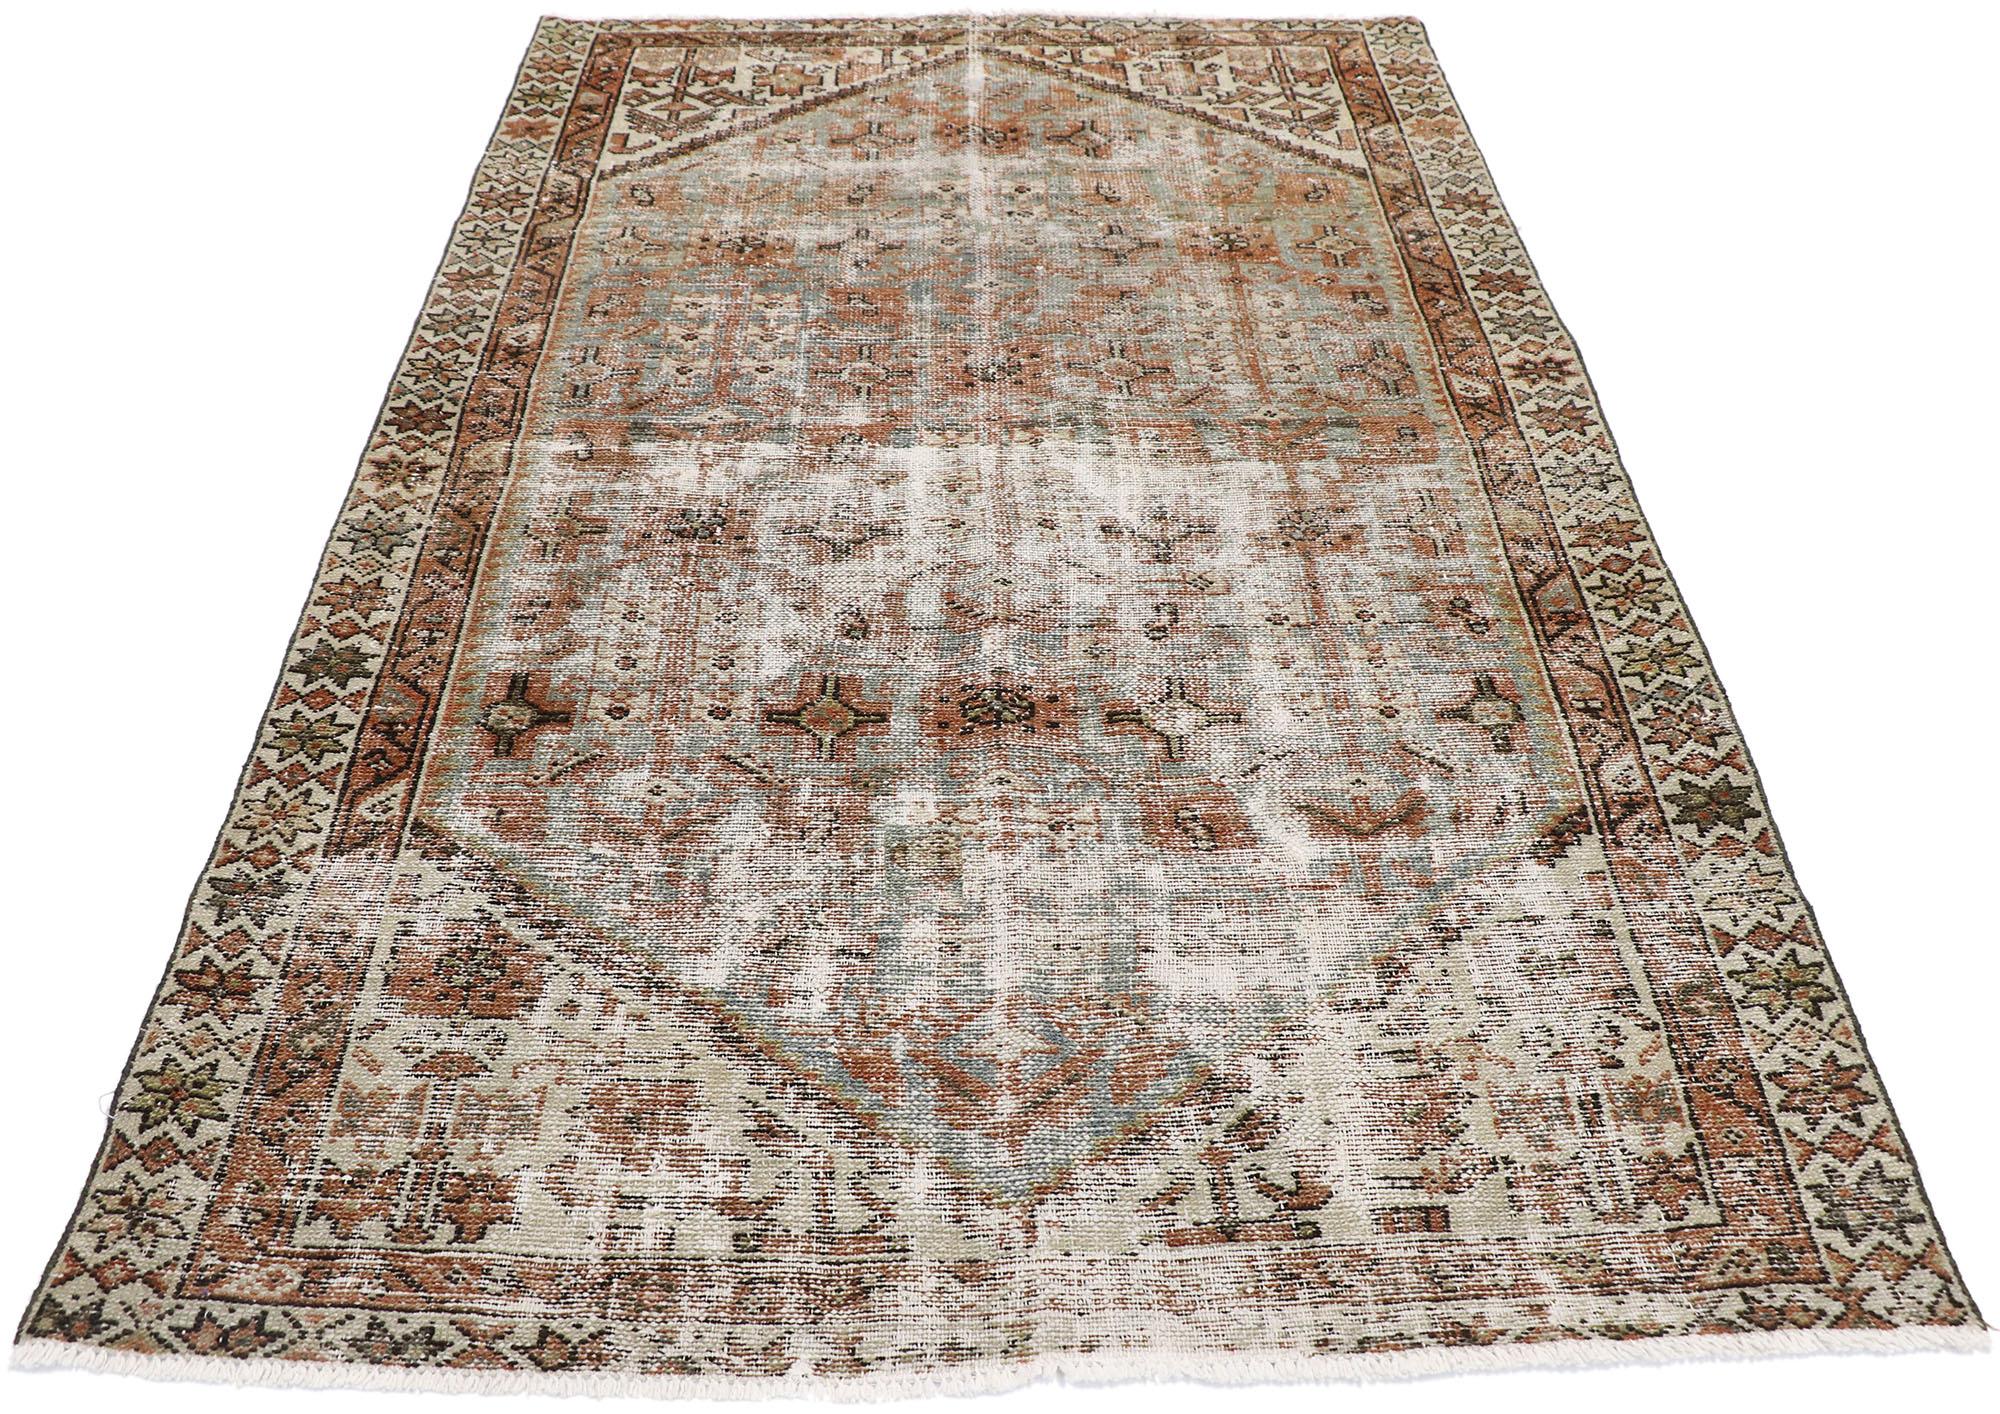 Malayer Distressed Antique Persian Hamadan Rug with Modern Rustic Artisan Style For Sale